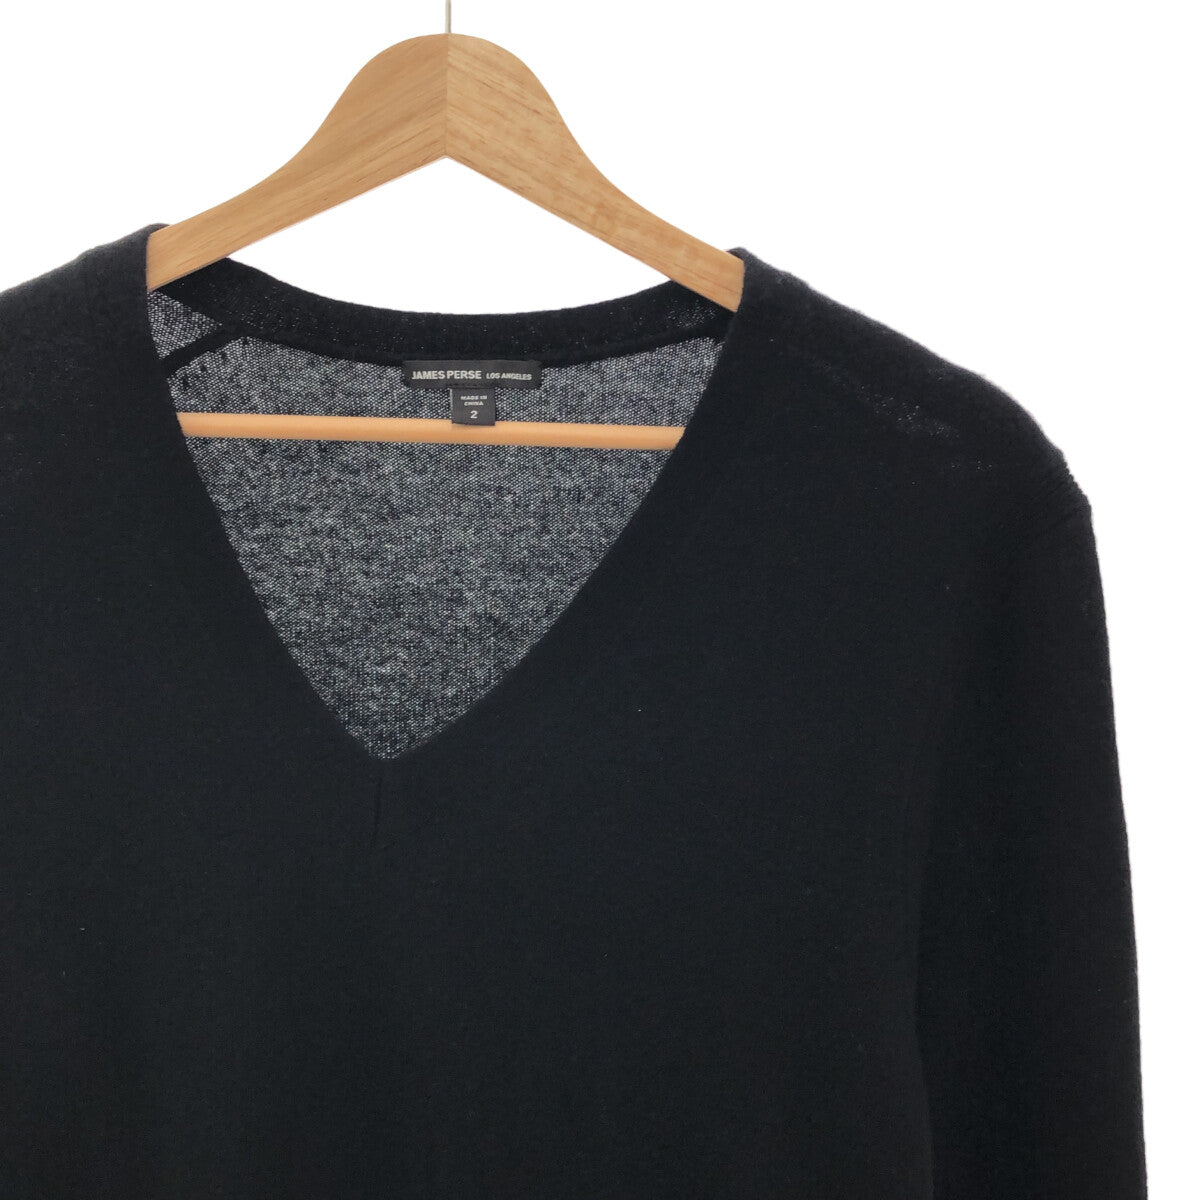 james perse?ジェームスパースcashmere knit カシミア素材ウール